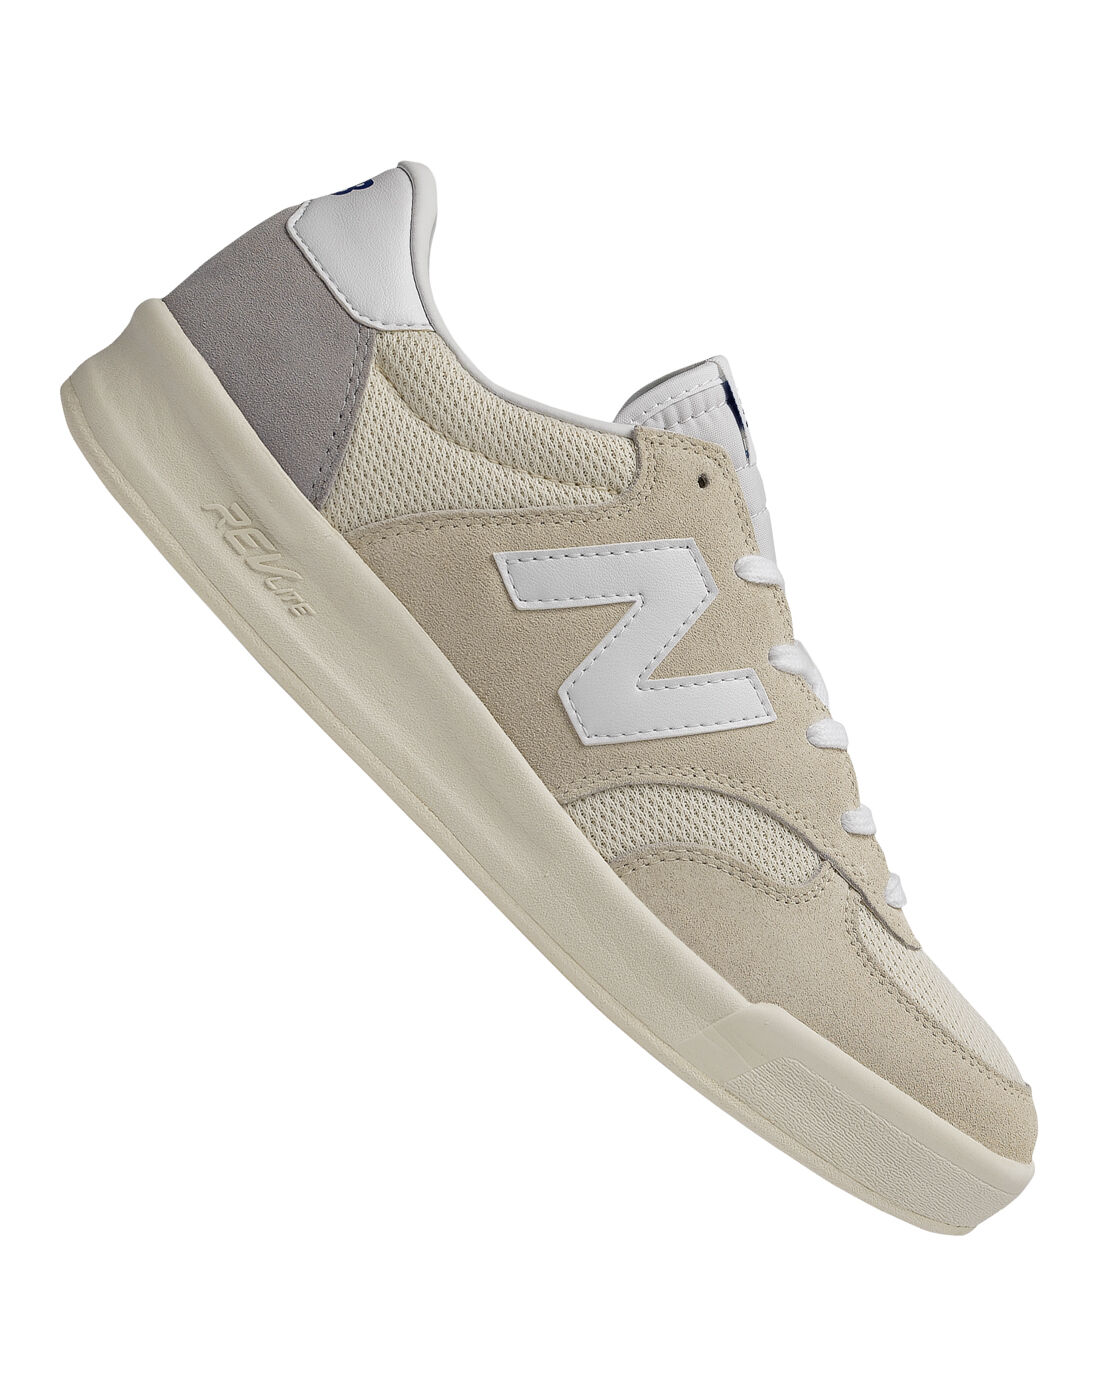 New Balance Mens CRT300 Trainers - White | Life Style Sports IE